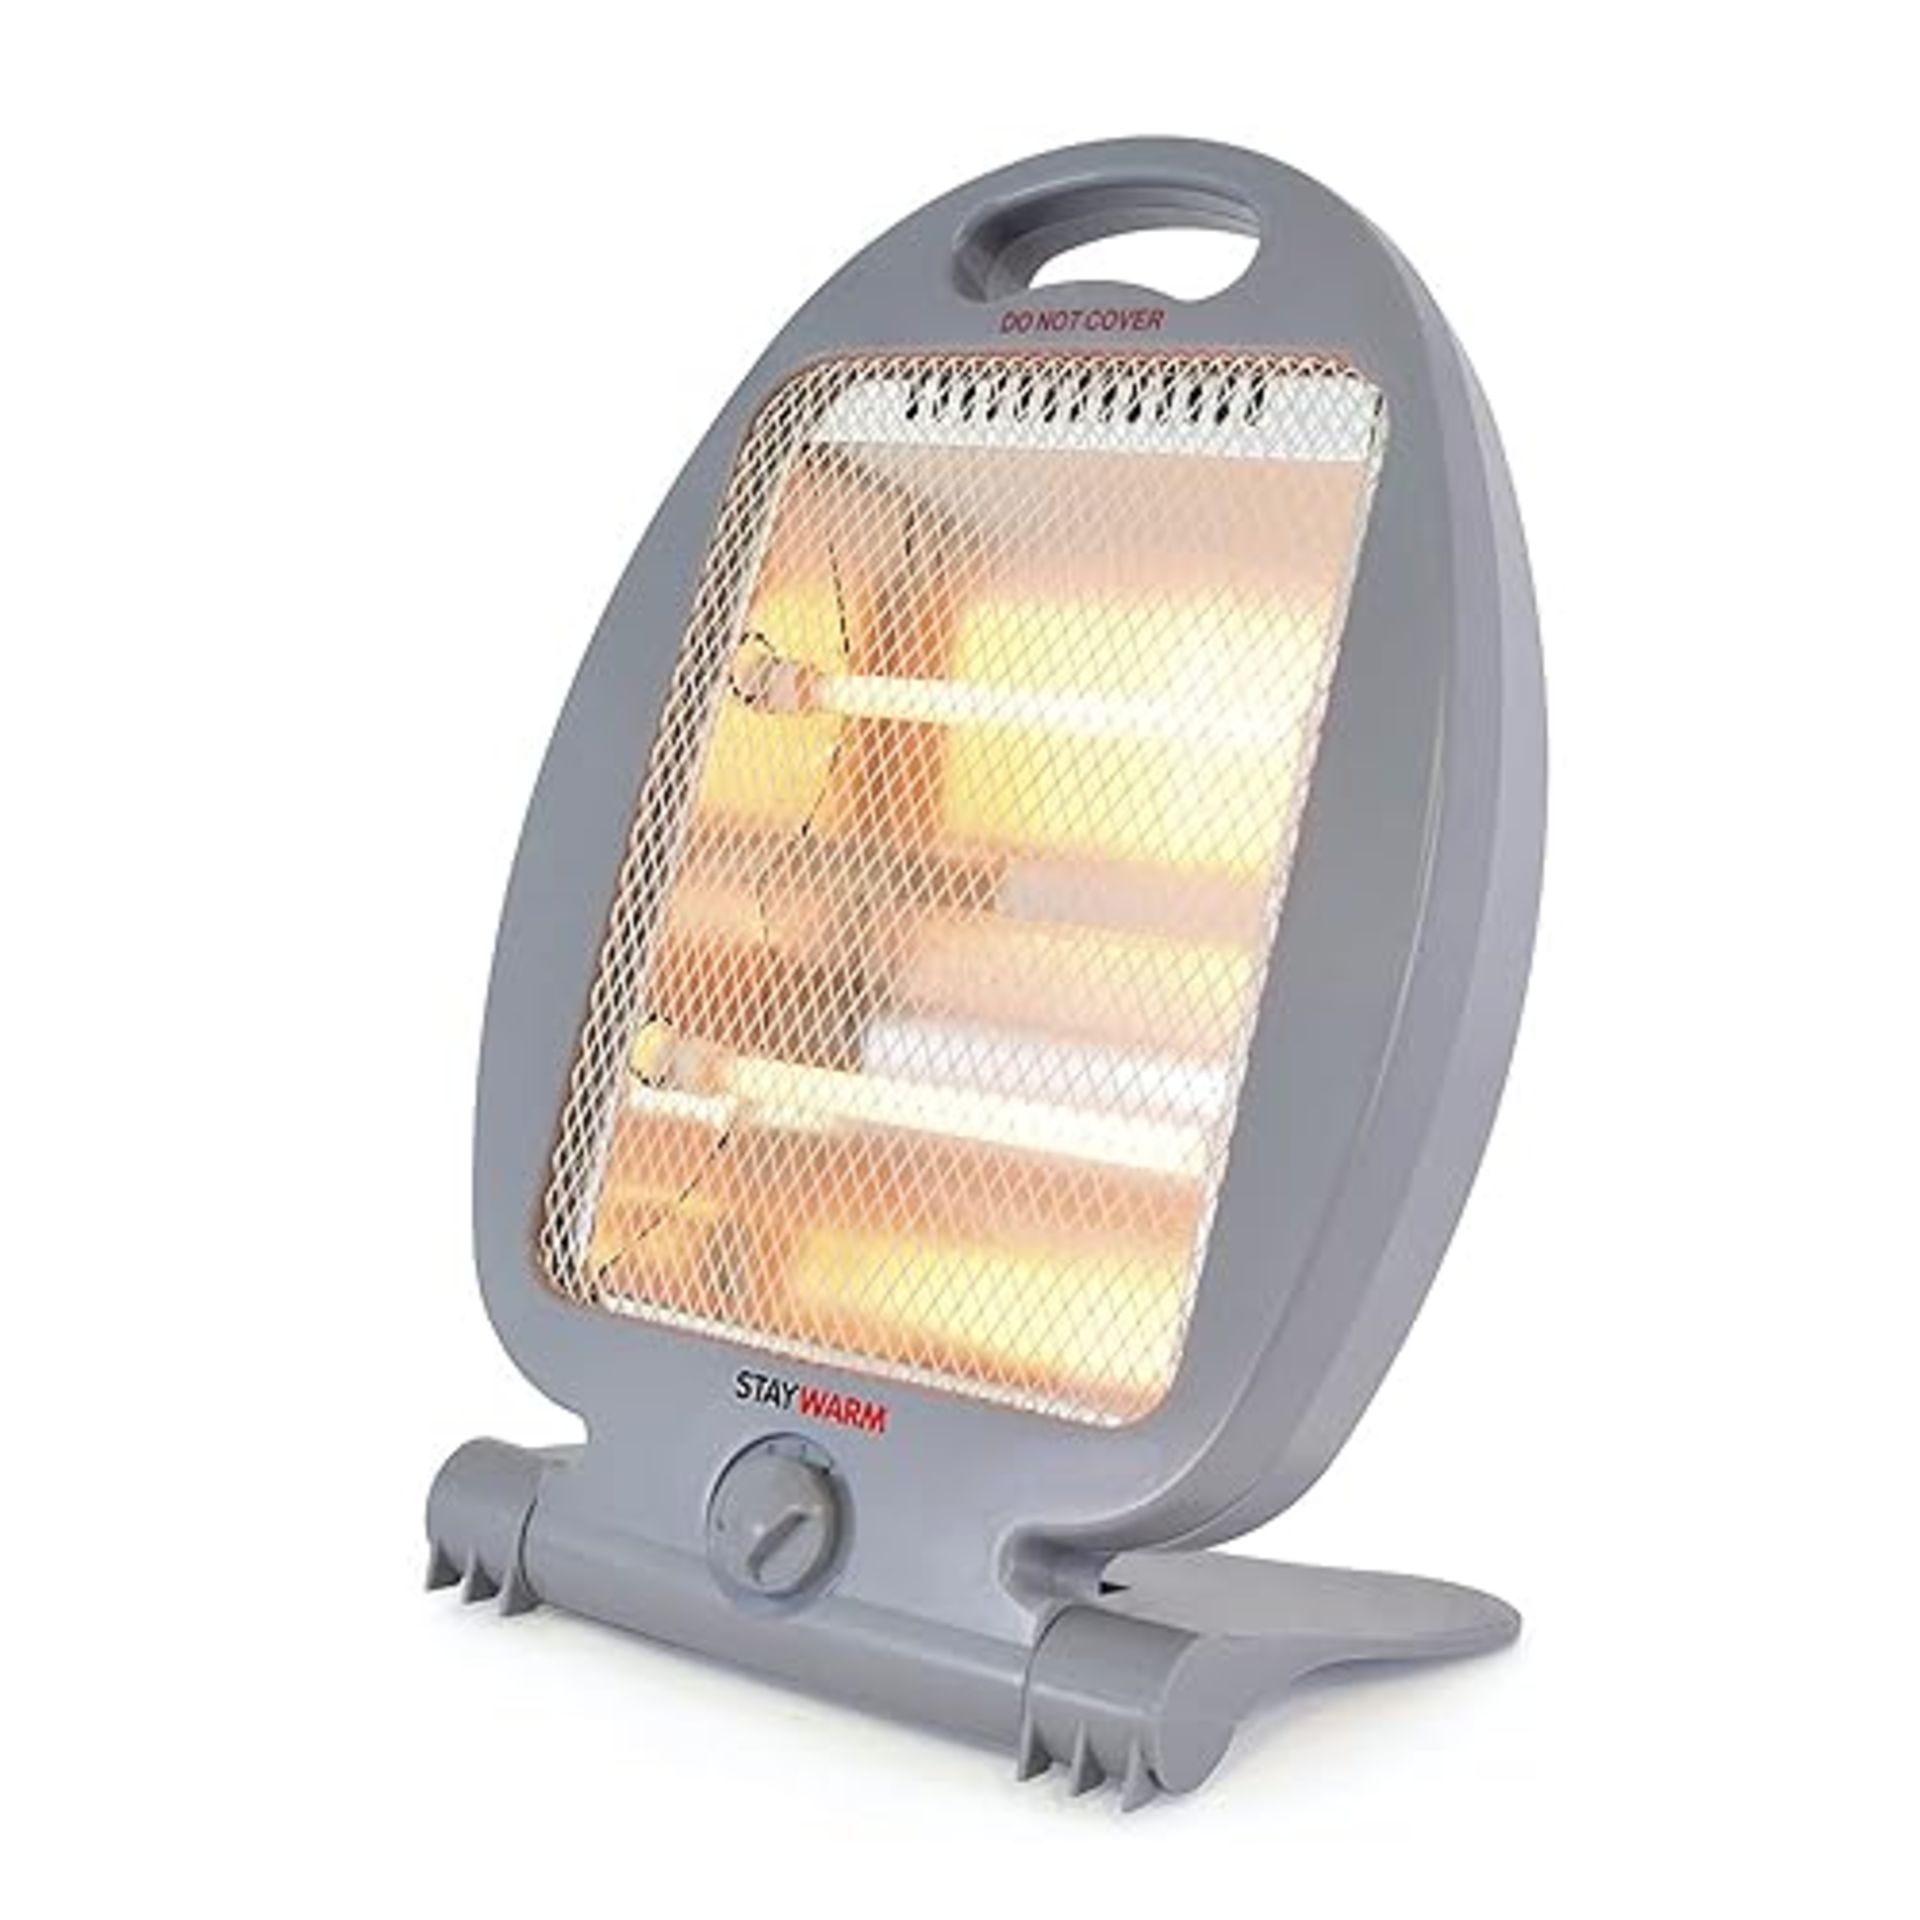 STAYWARM 800w 2 Bar Quartz Heater with 2 Heat Settings / Safety Tip-over Switch / Wide Angle Heat R